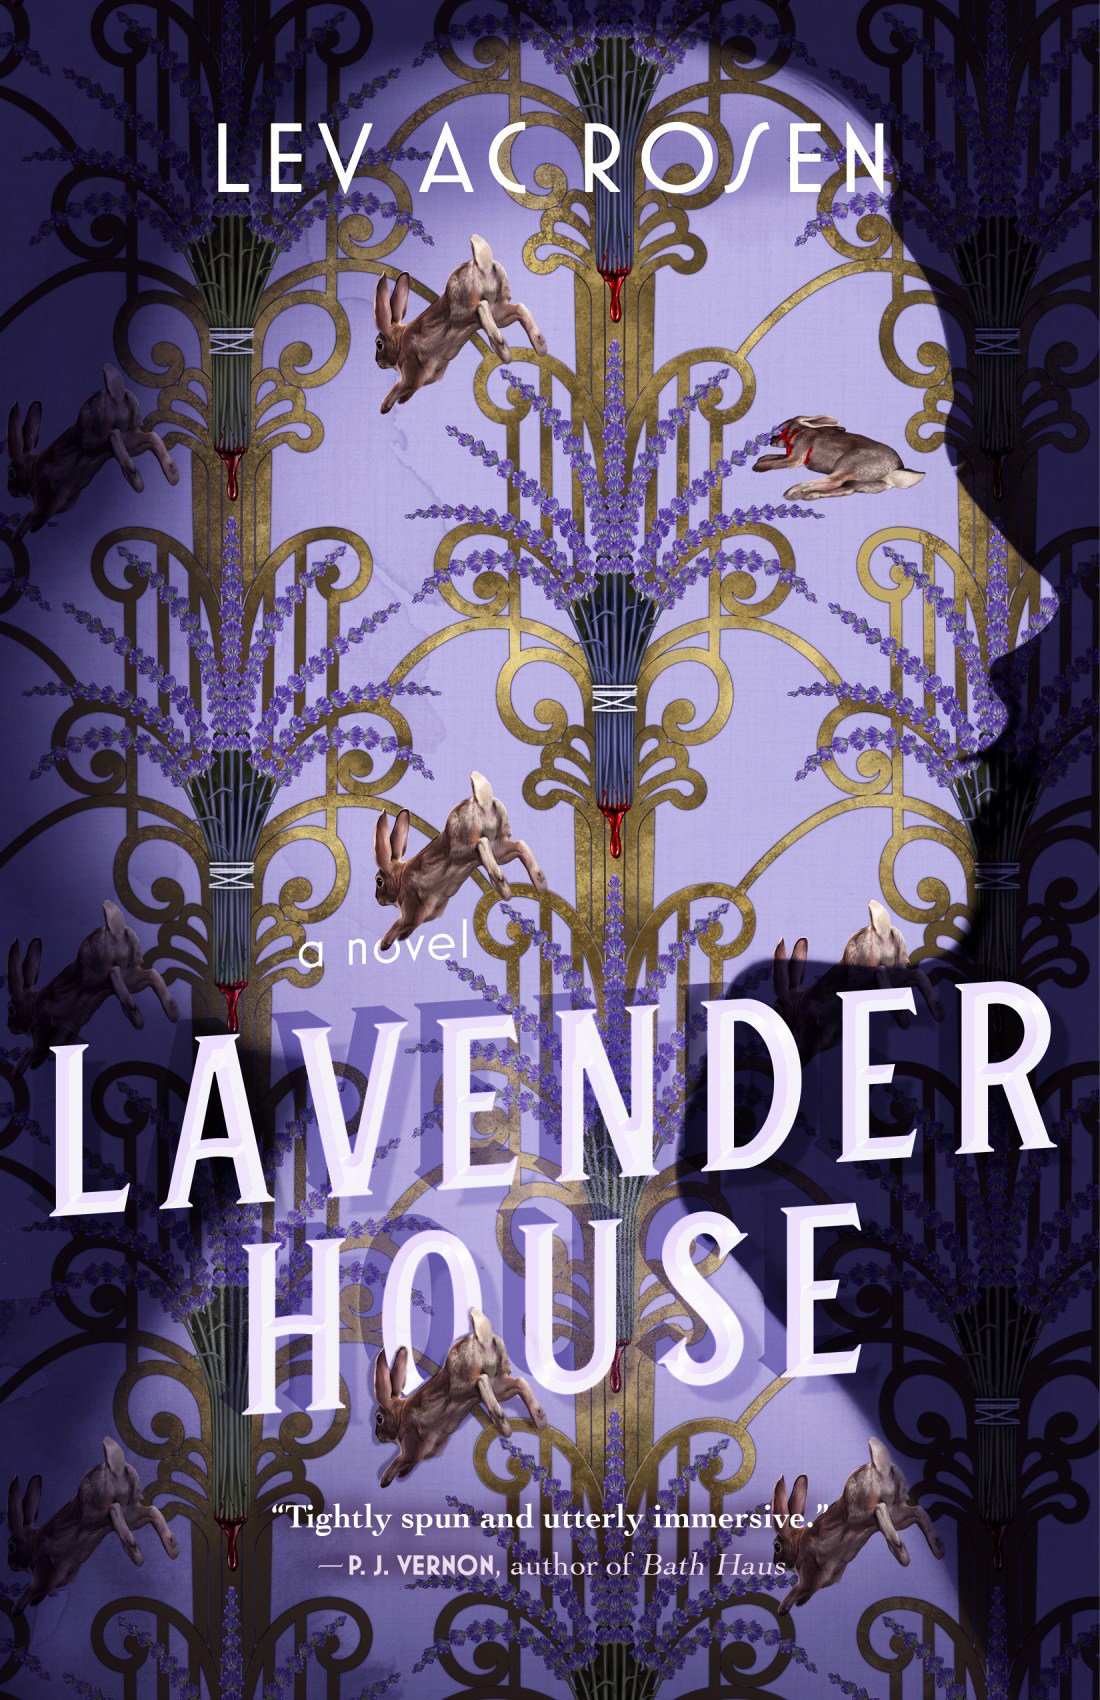 Lavender House by Lev AC Rosen book cover